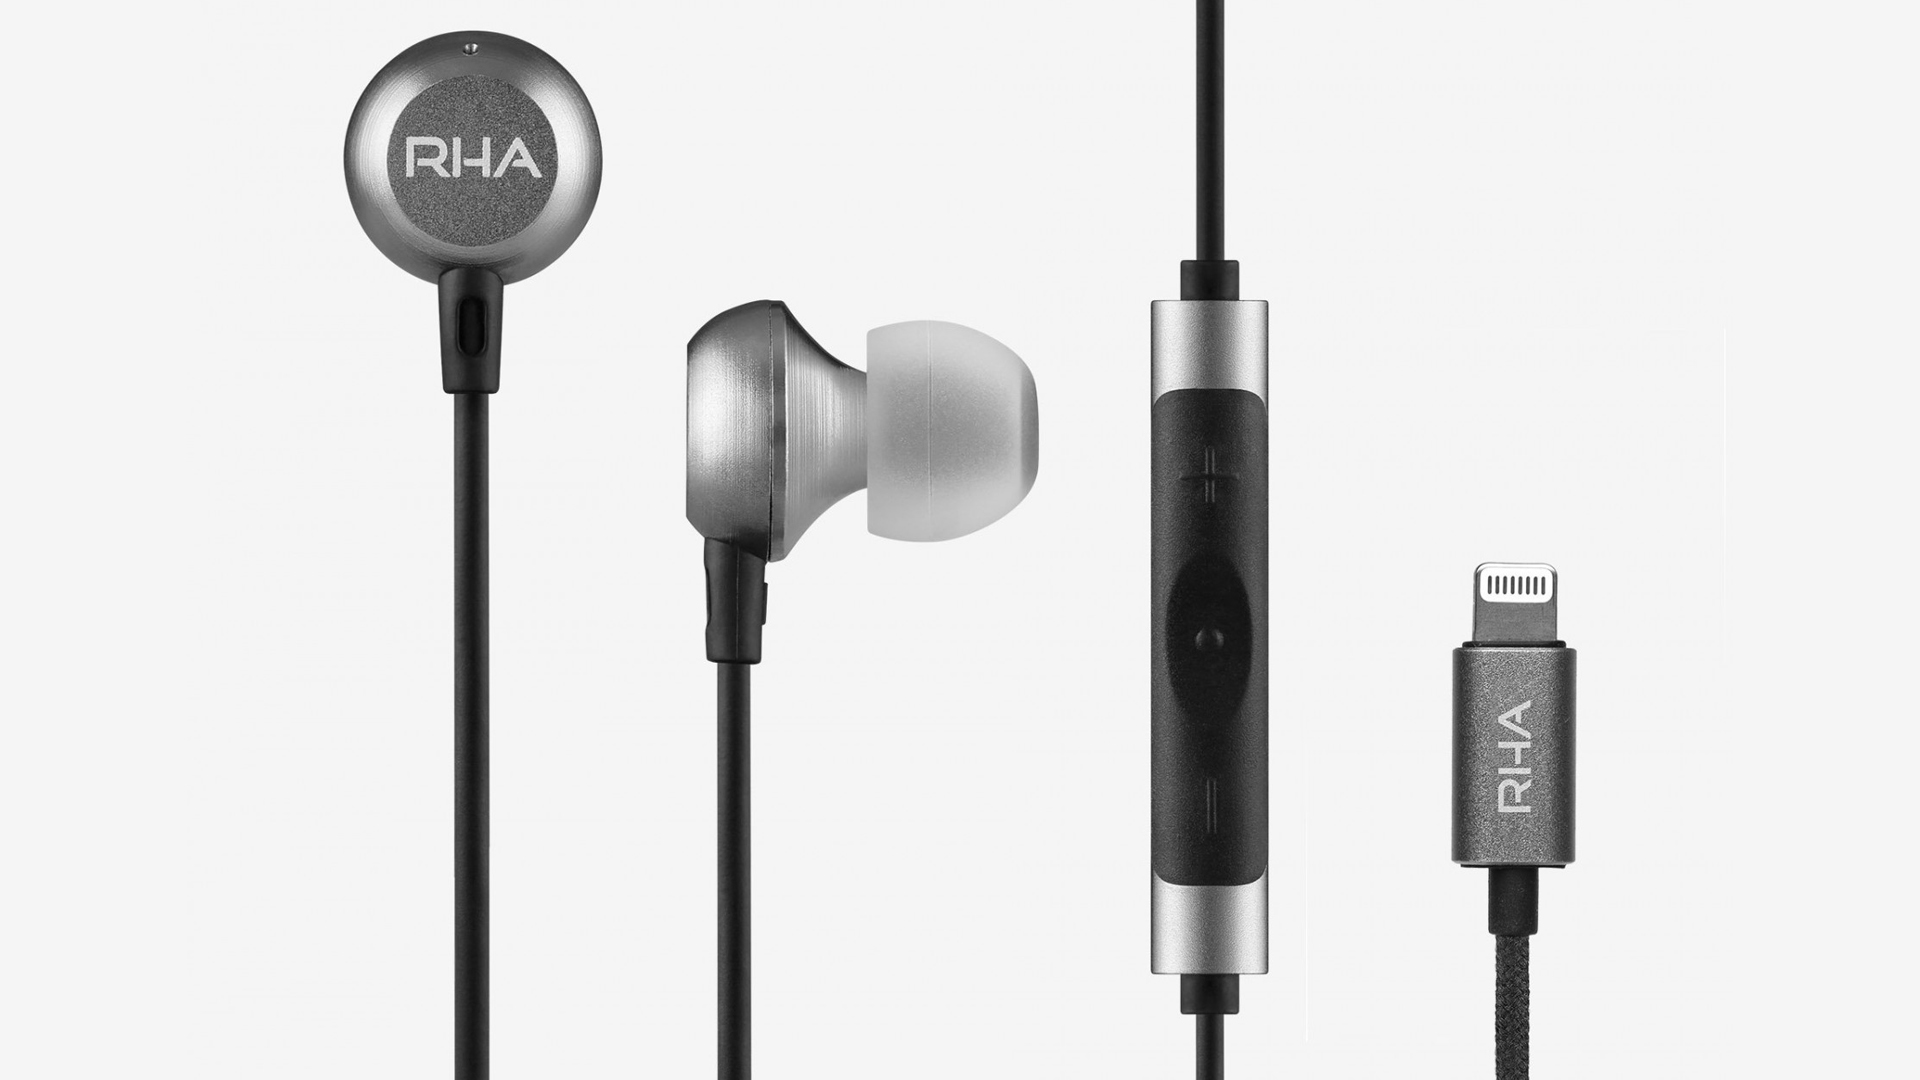 Pictured is the RHA MA650i earbuds with the control module and new Lightning connector. 